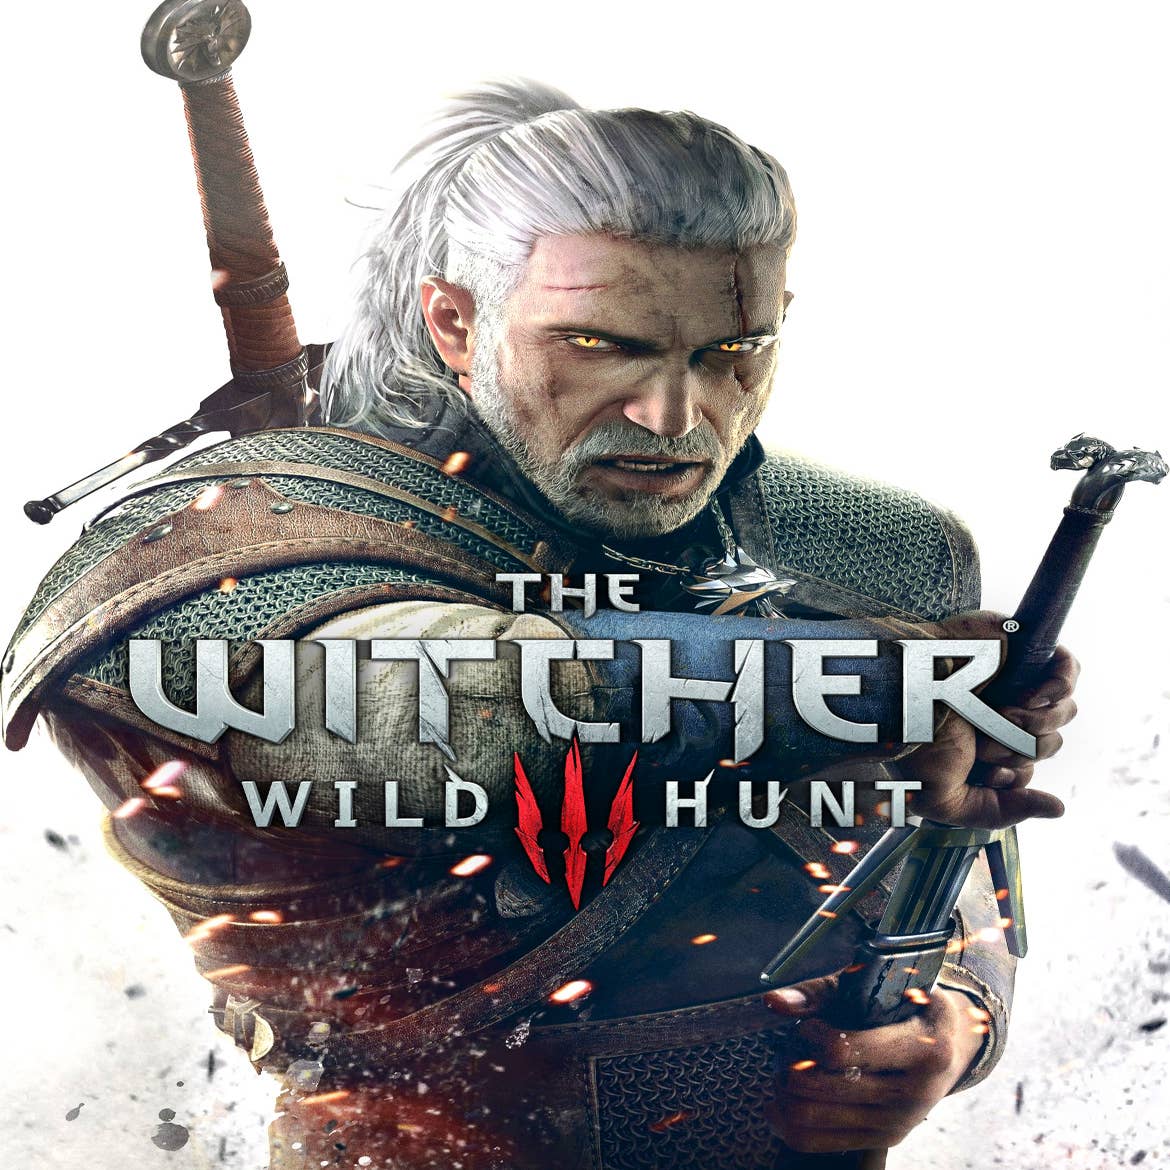 The Witcher 3 PS5/Xbox Series update coming 'soon' developer promises